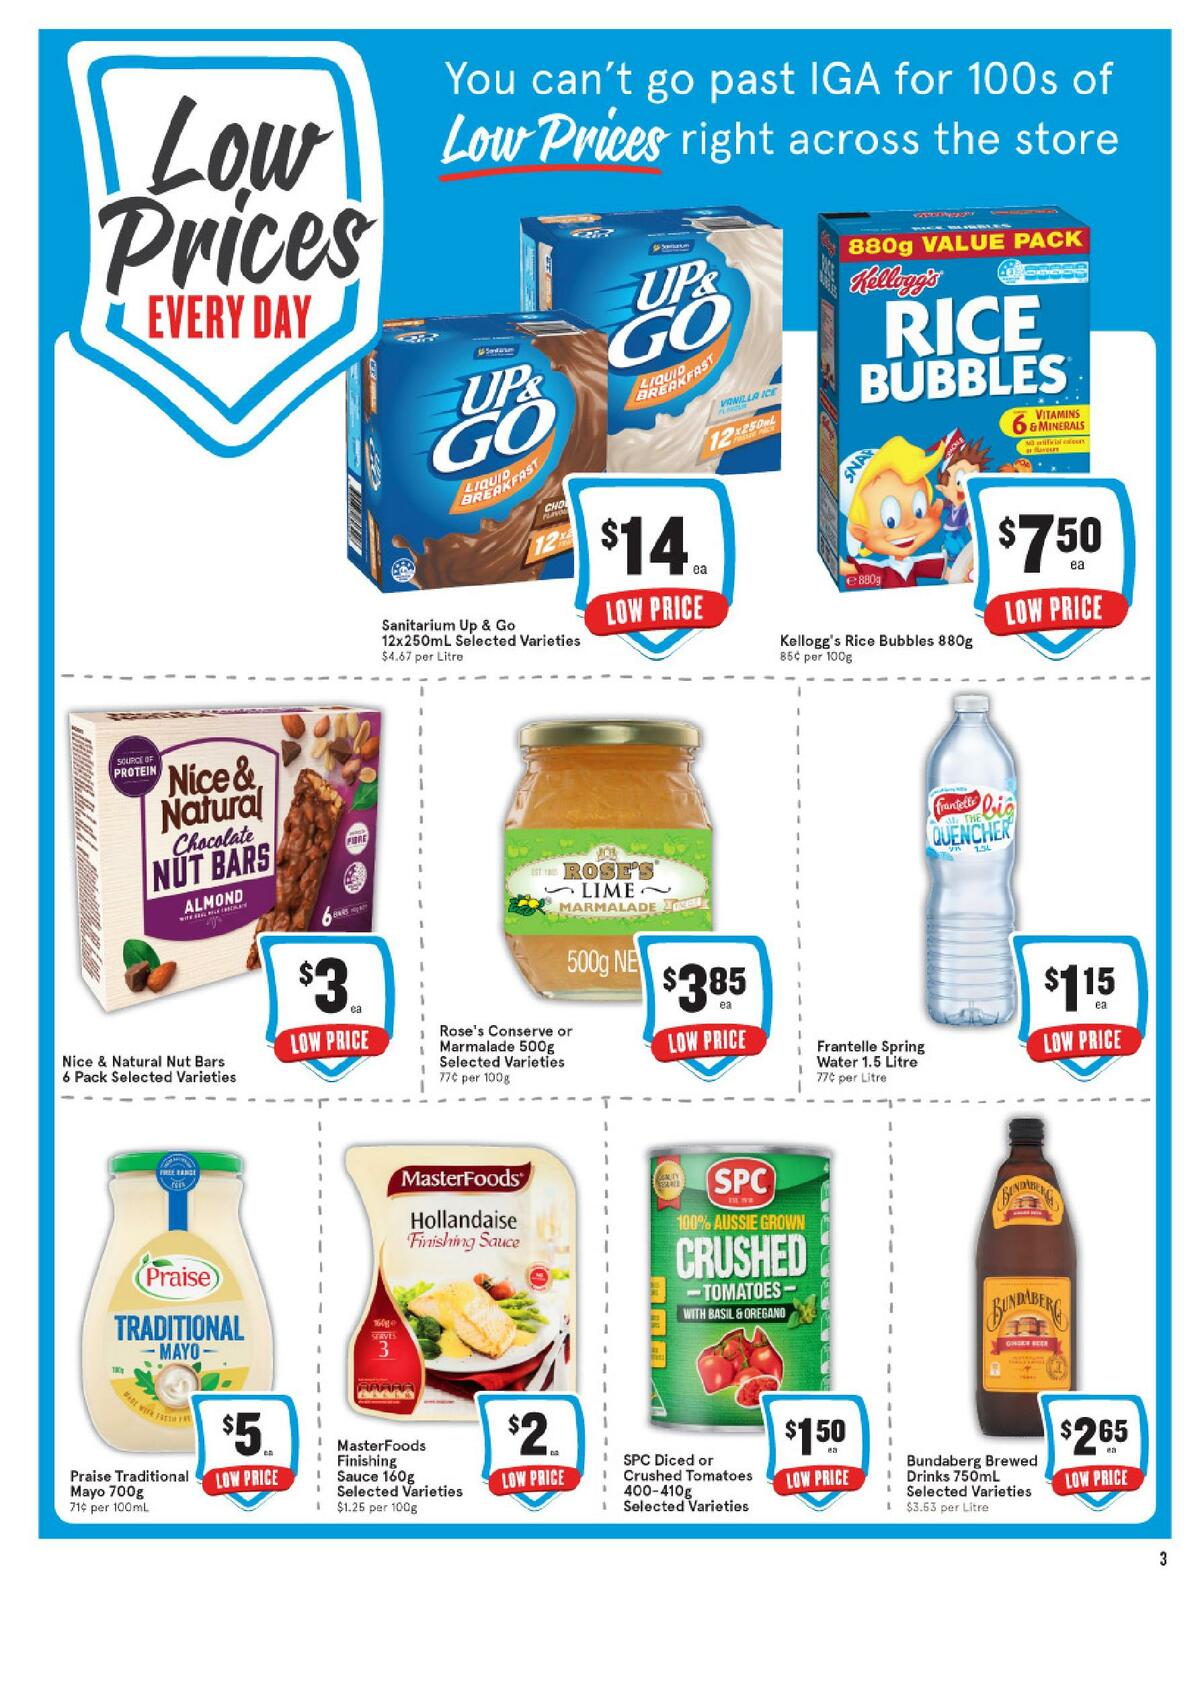 IGA Catalogues from 30 June